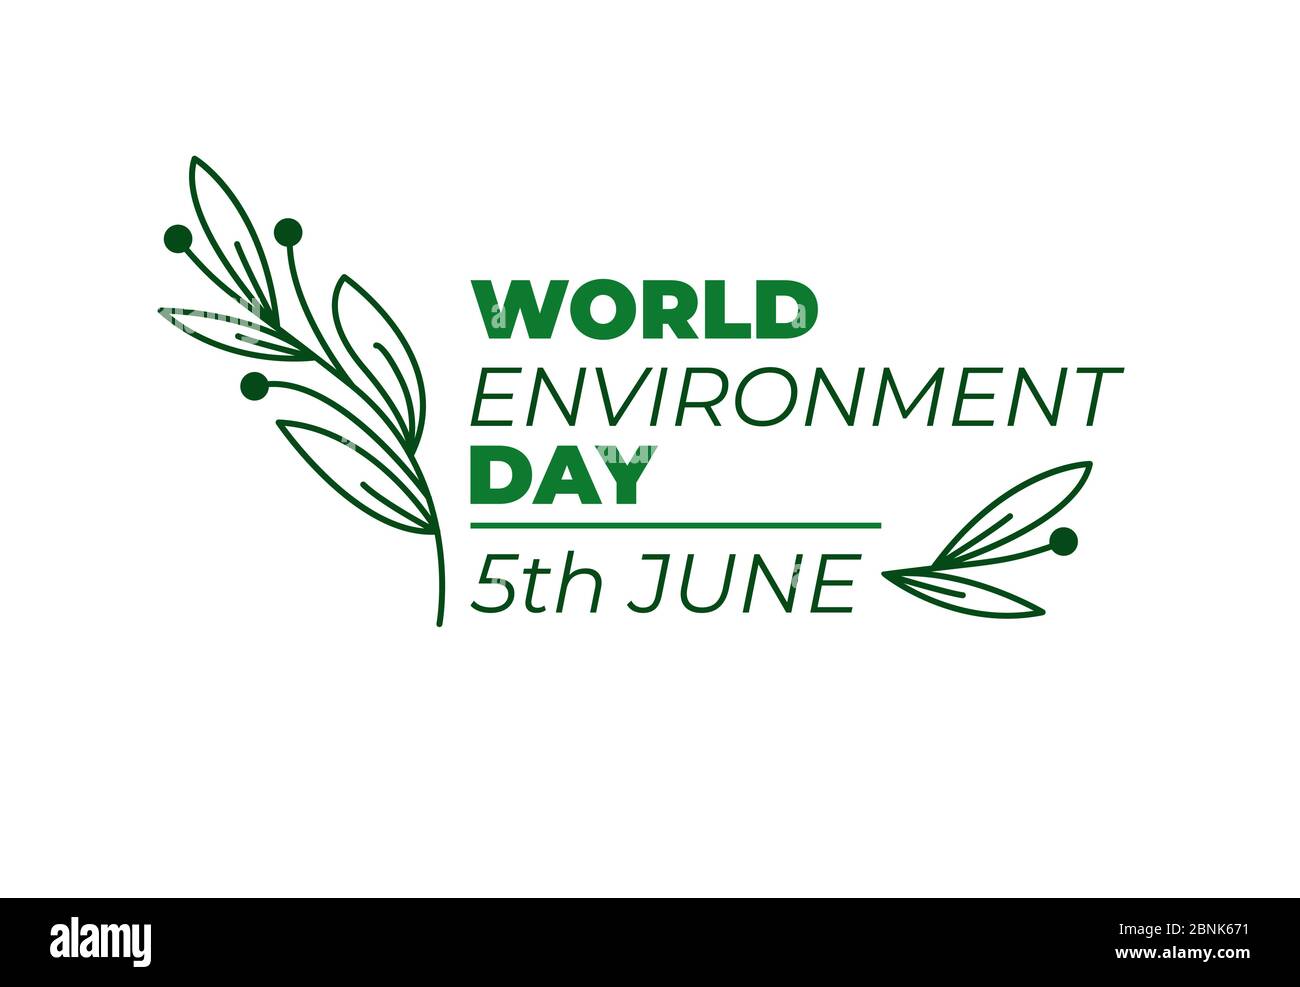 World environment day logo Cut Out Stock Images & Pictures - Alamy